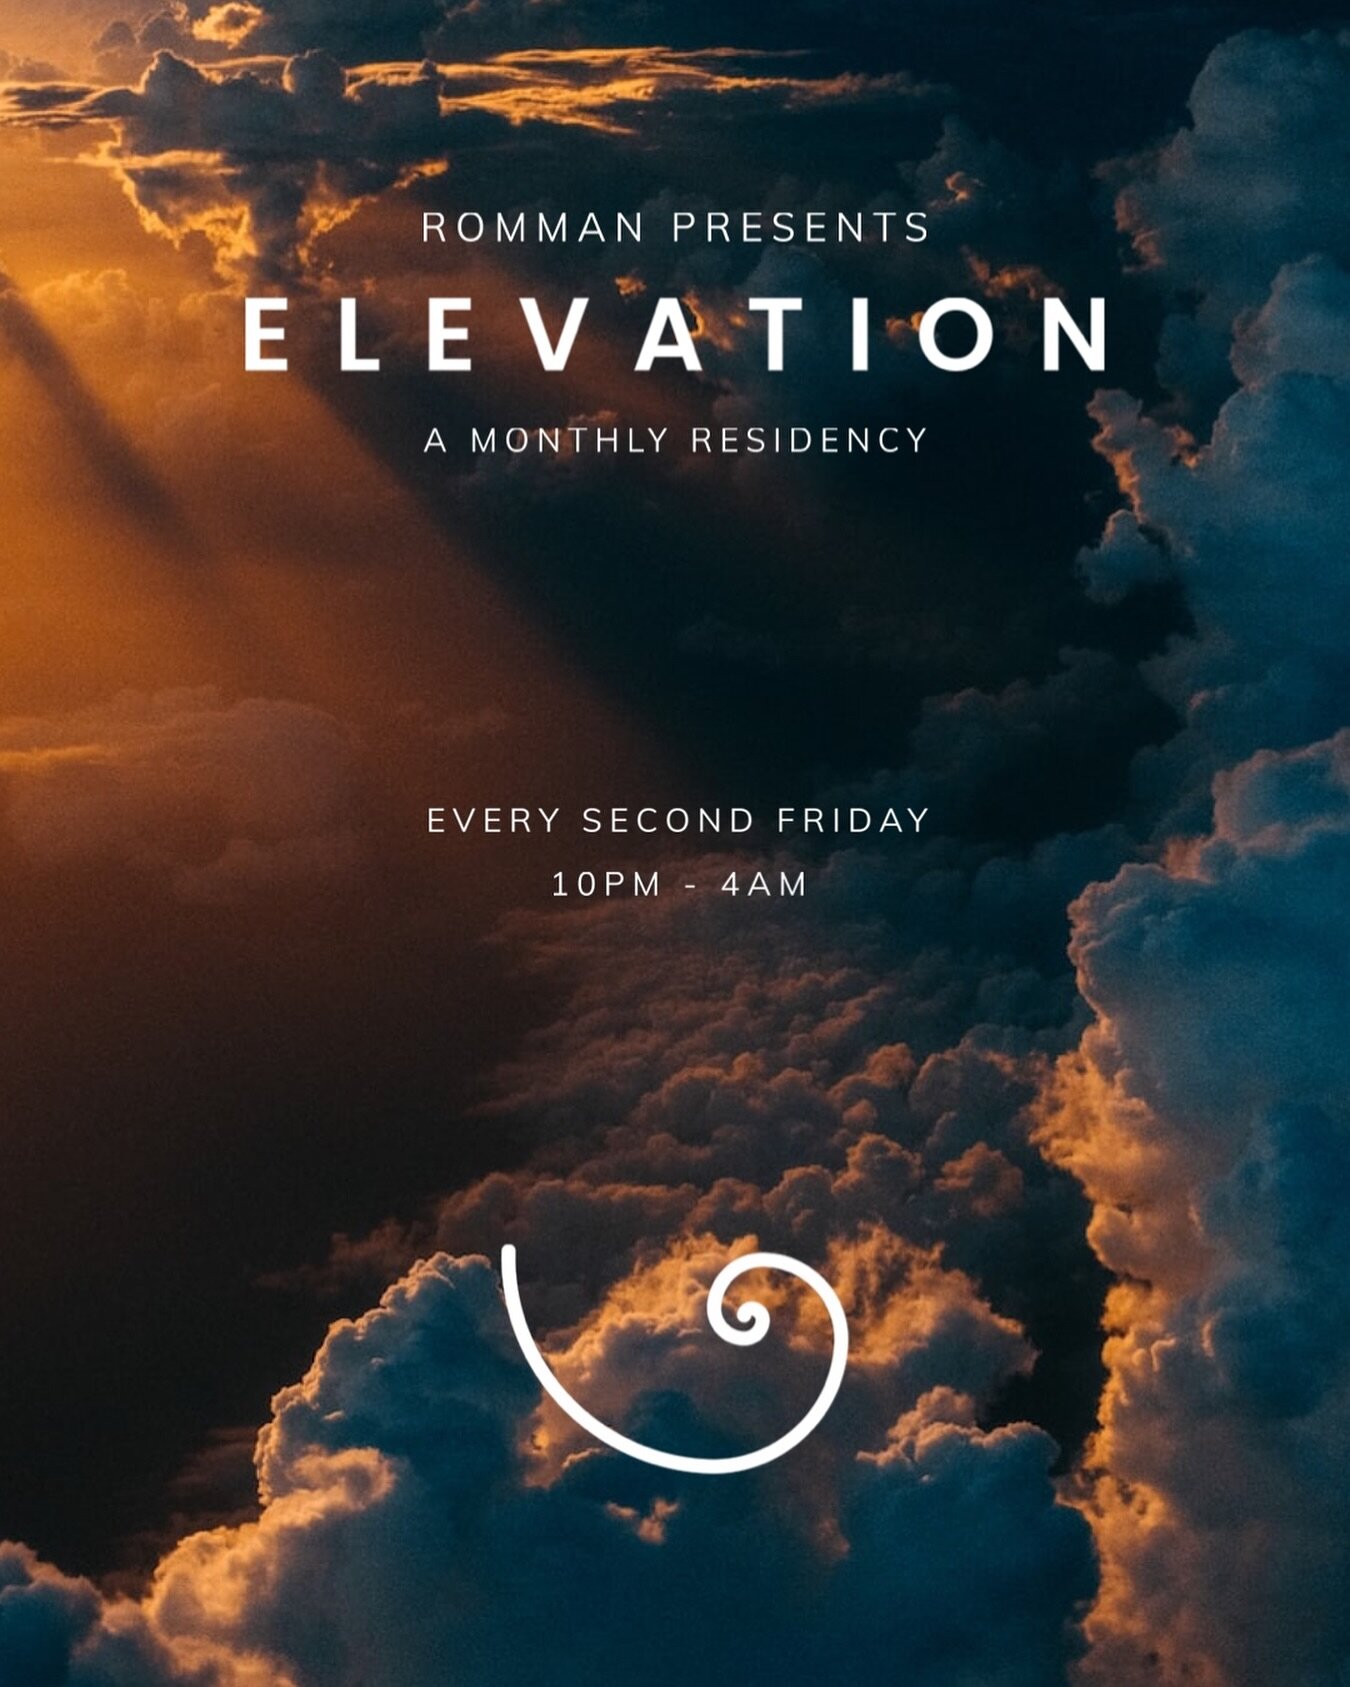 Tonight, the incredible @rommanmusic returns to Atlanta for his Monthly ELEVATION party in the Sound Gallery. 

he&rsquo;ll be playing his brand of elegant, intellectual music all night long. 

10 PM until 4 AM

No cover